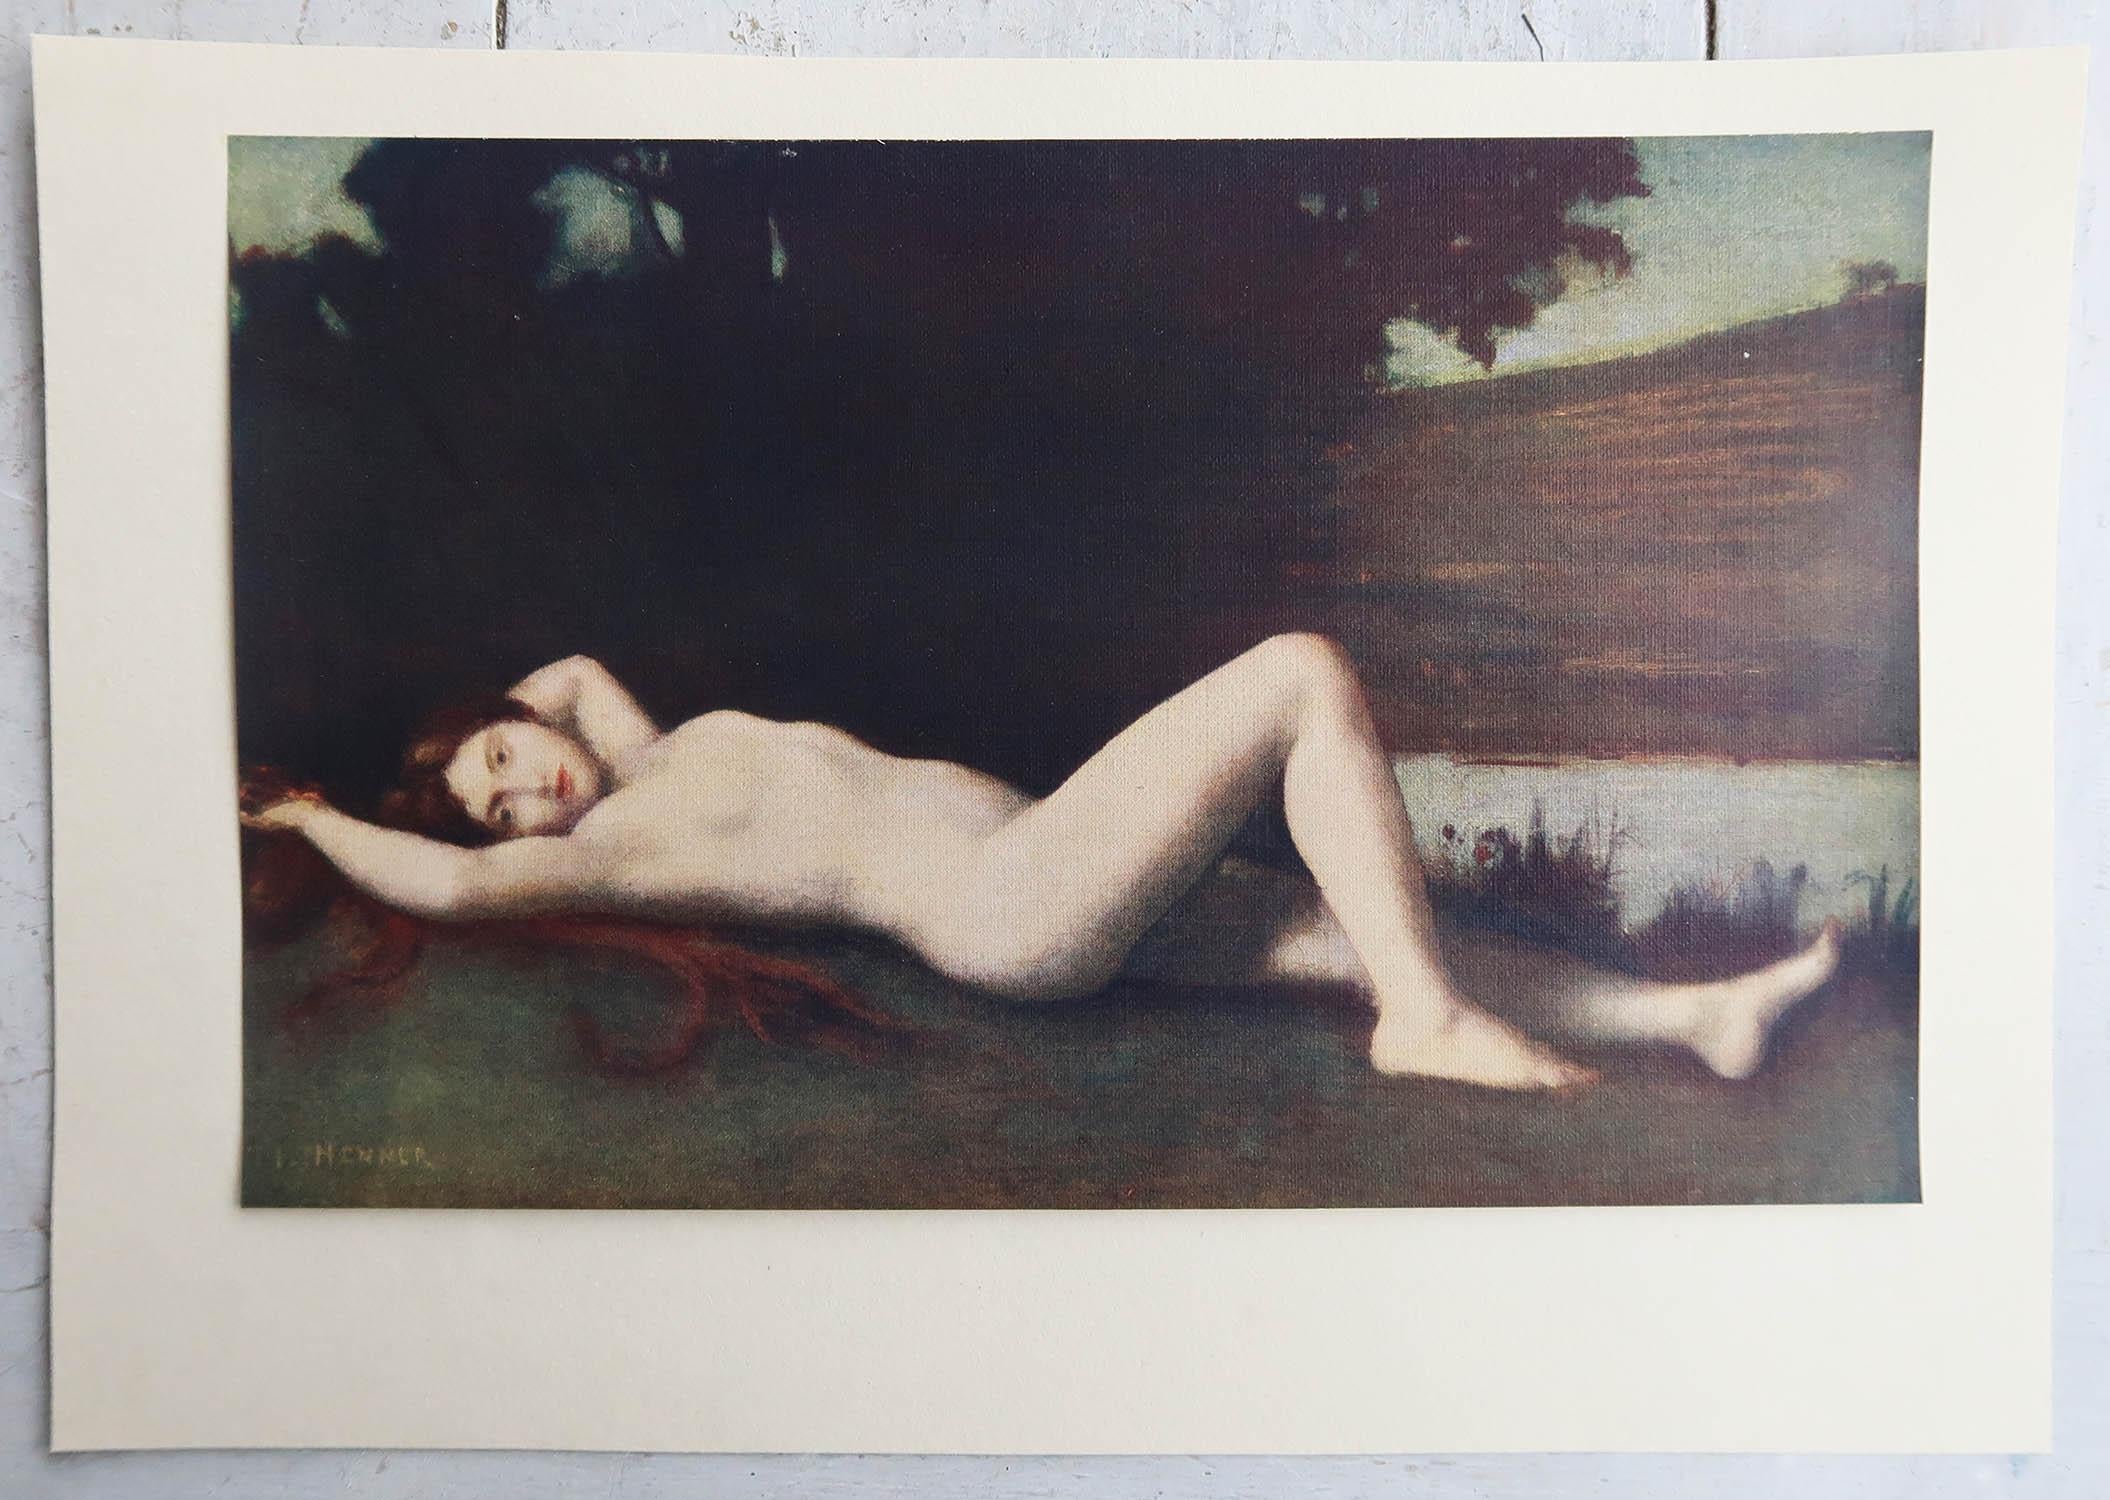 English Original Vintage Print of A Female Nude After Jean Jaques Henner. C.1920 For Sale